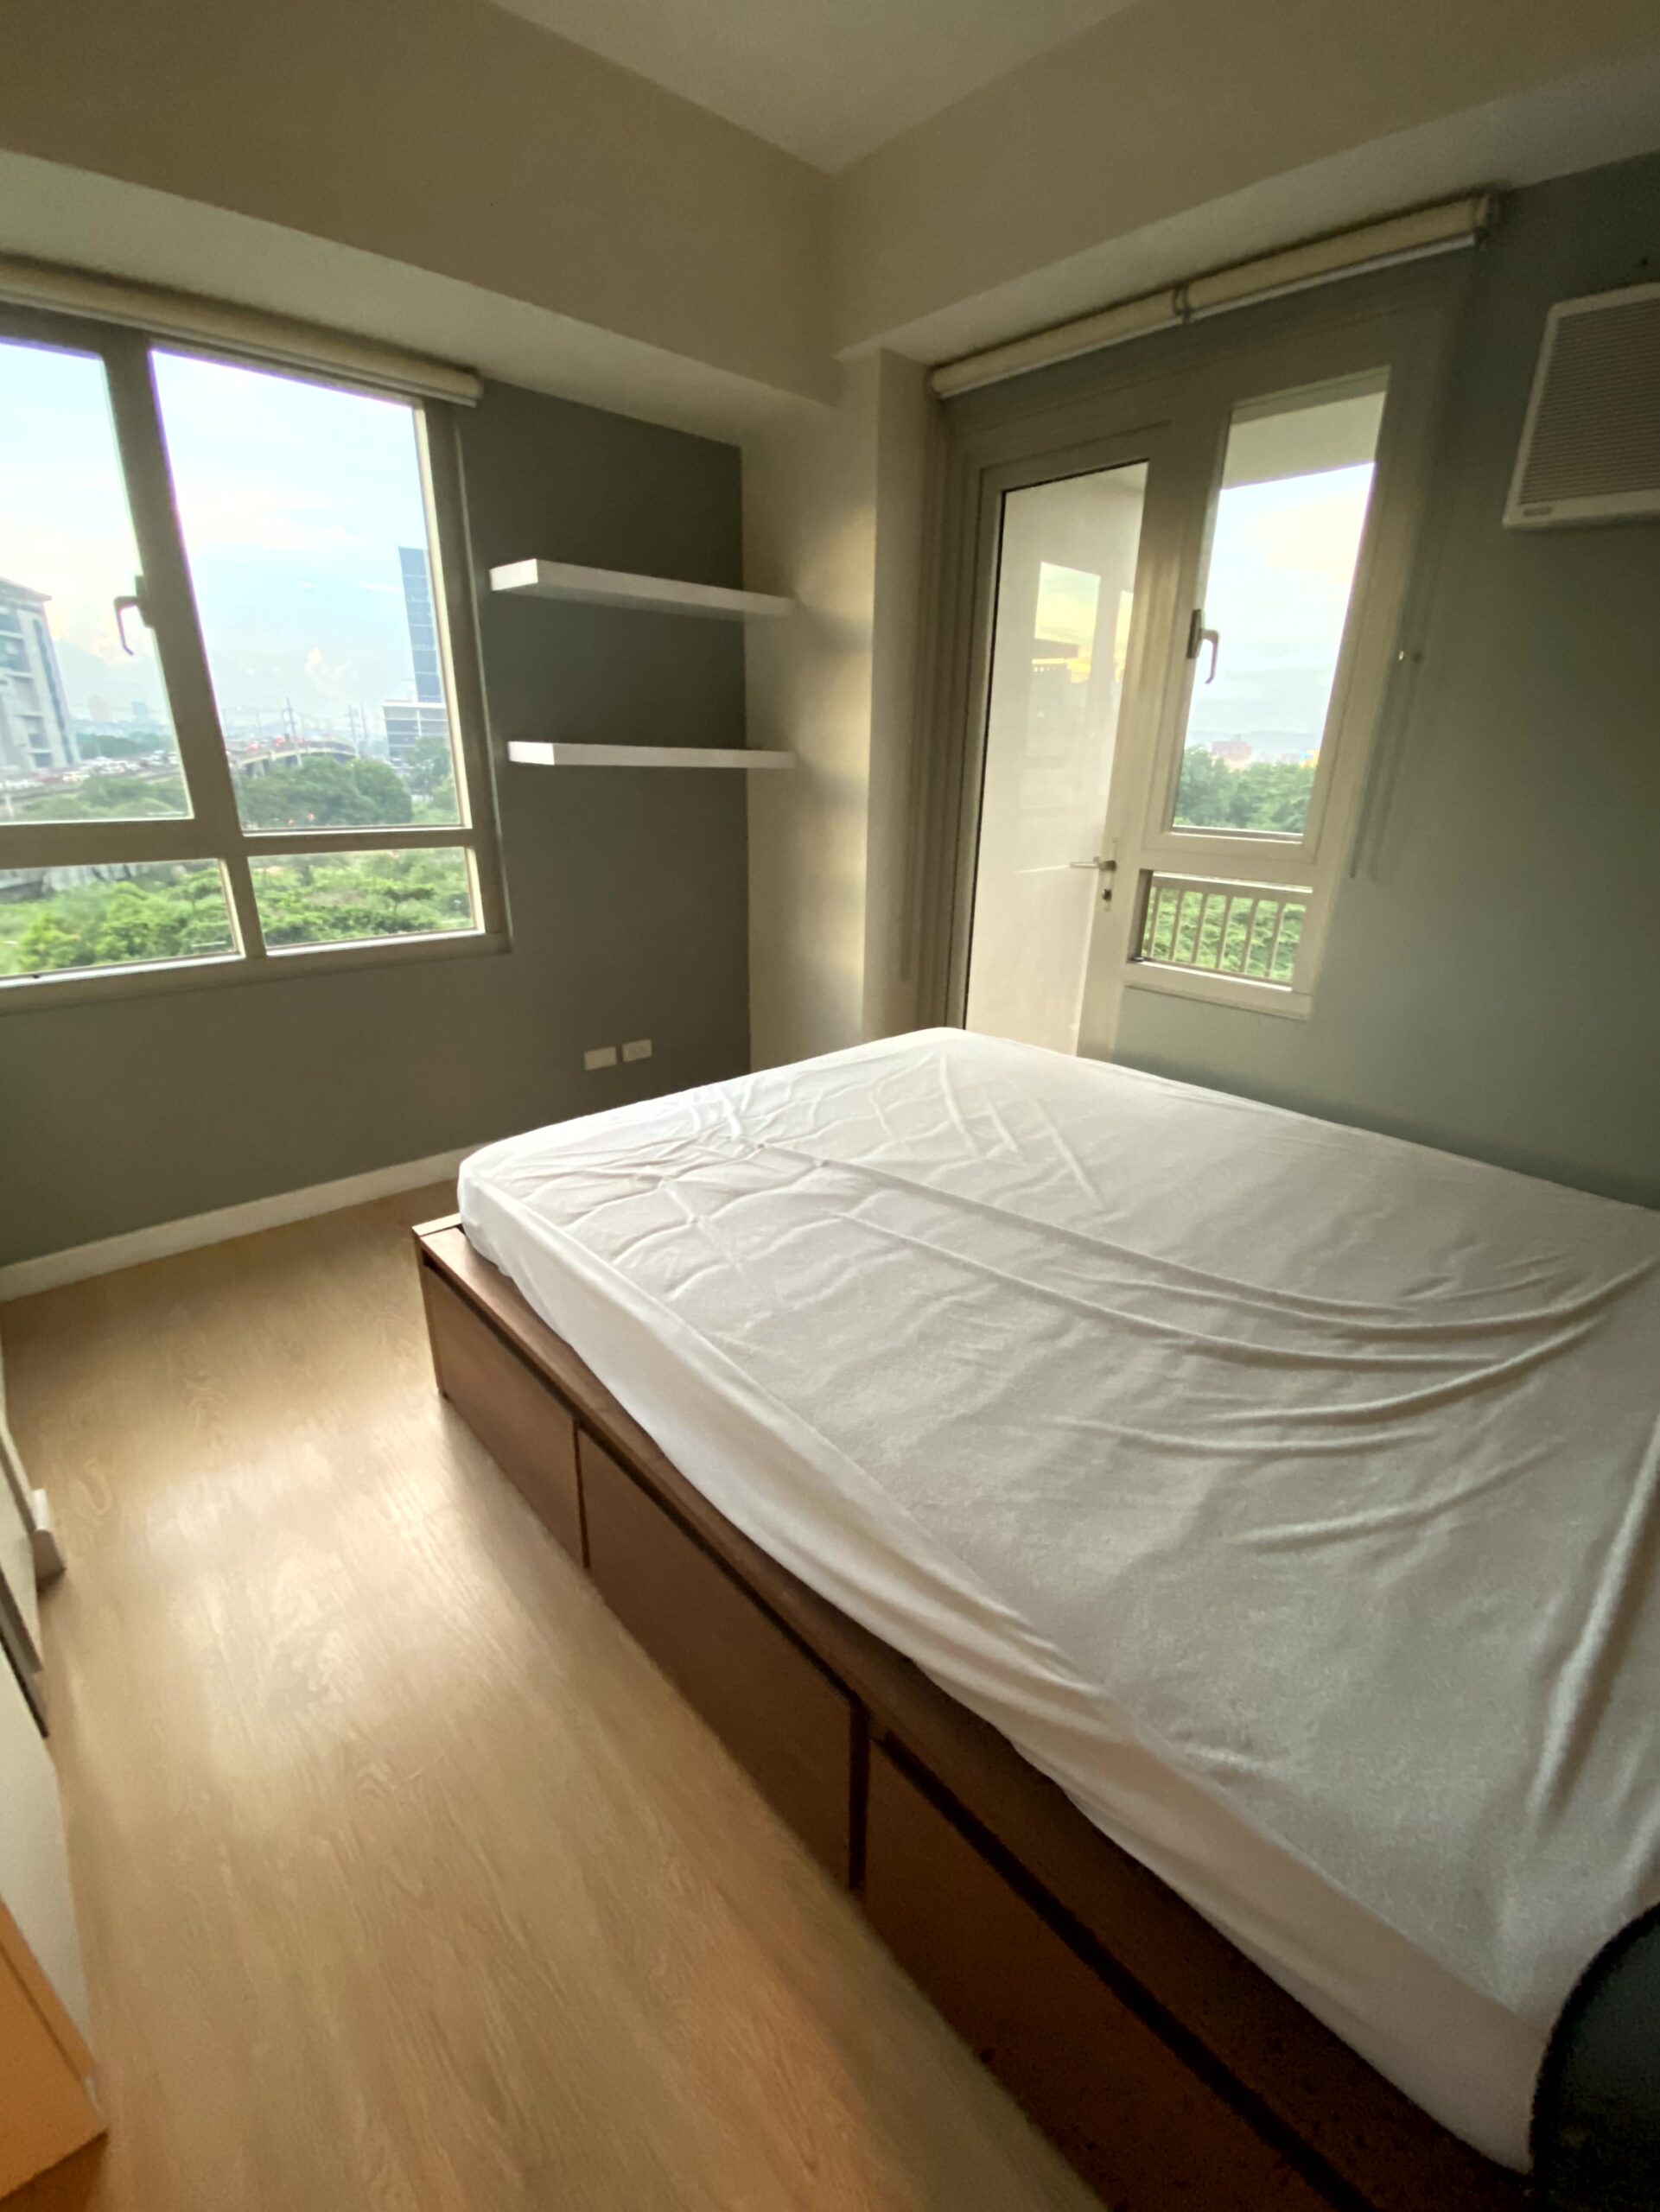 1BR (45 sqm) Fully Furnished Condo at The Grove by Rockwell, Pasig